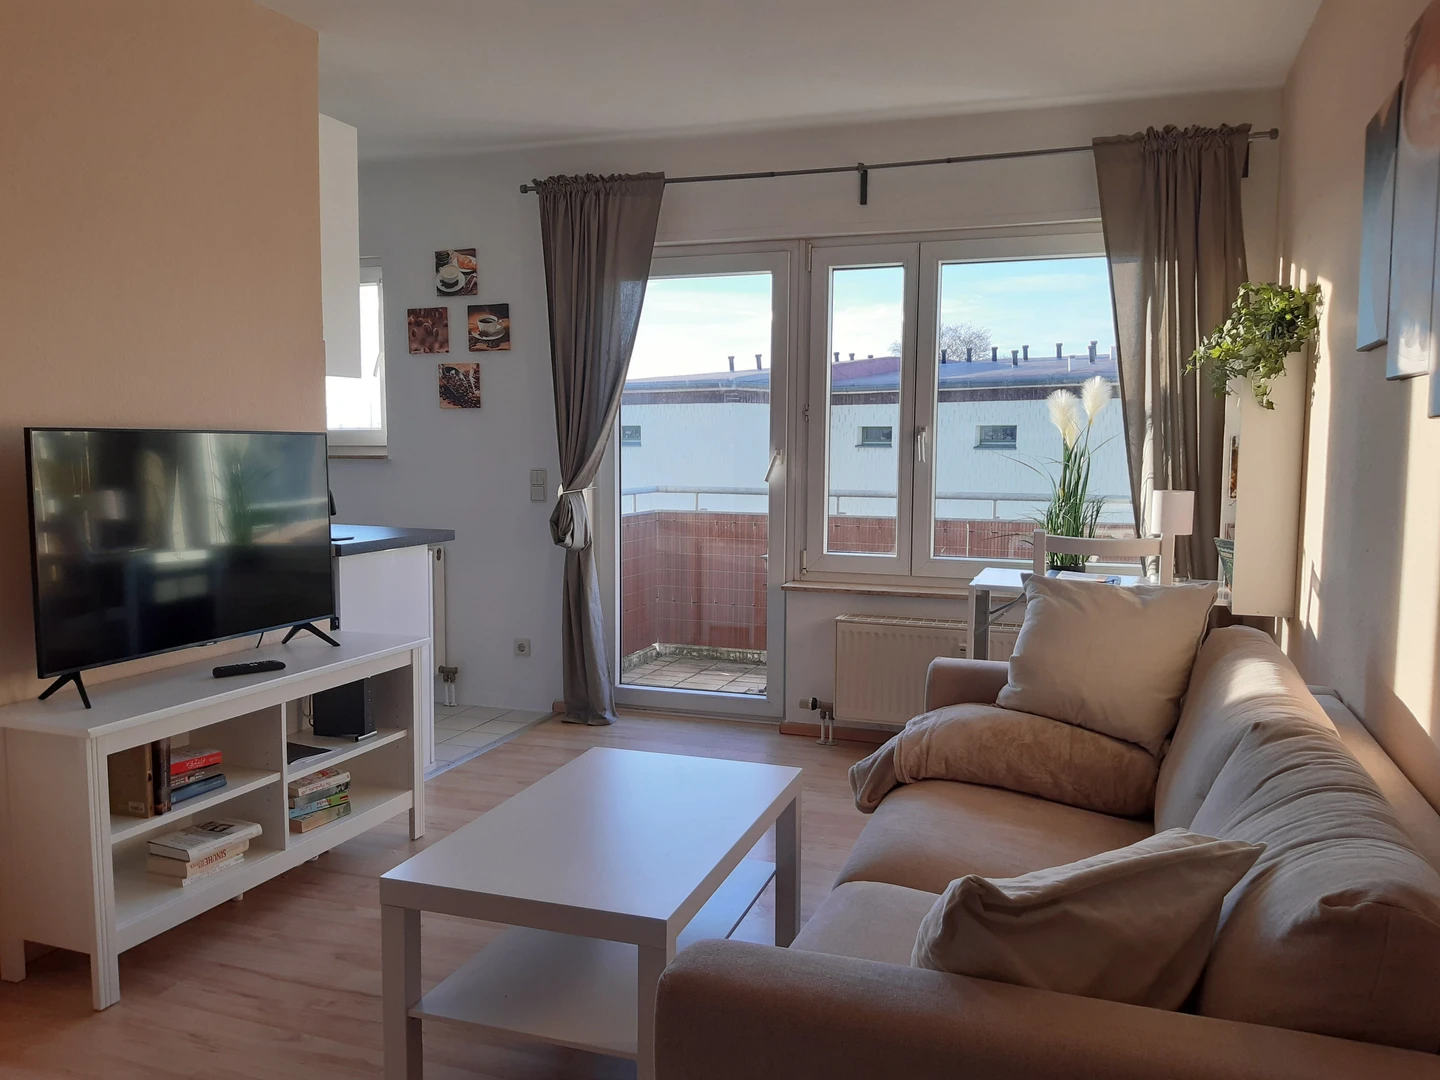 Room for rent in a shared flat in Leipzig